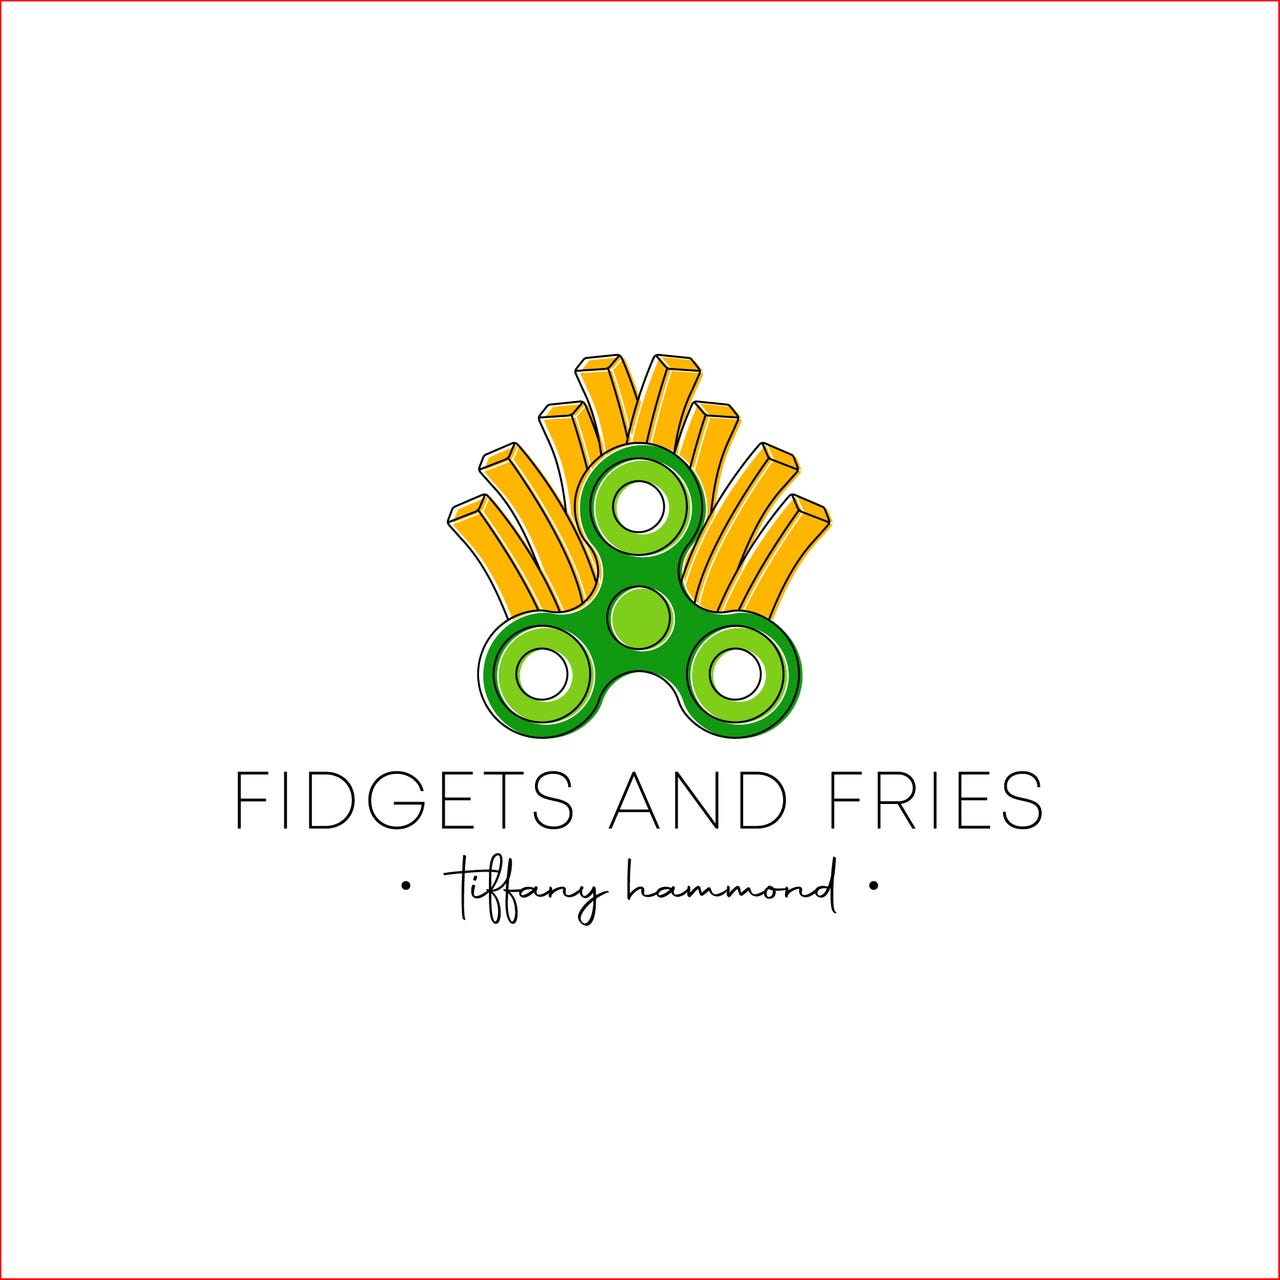 Artwork for Fidgets and Fries